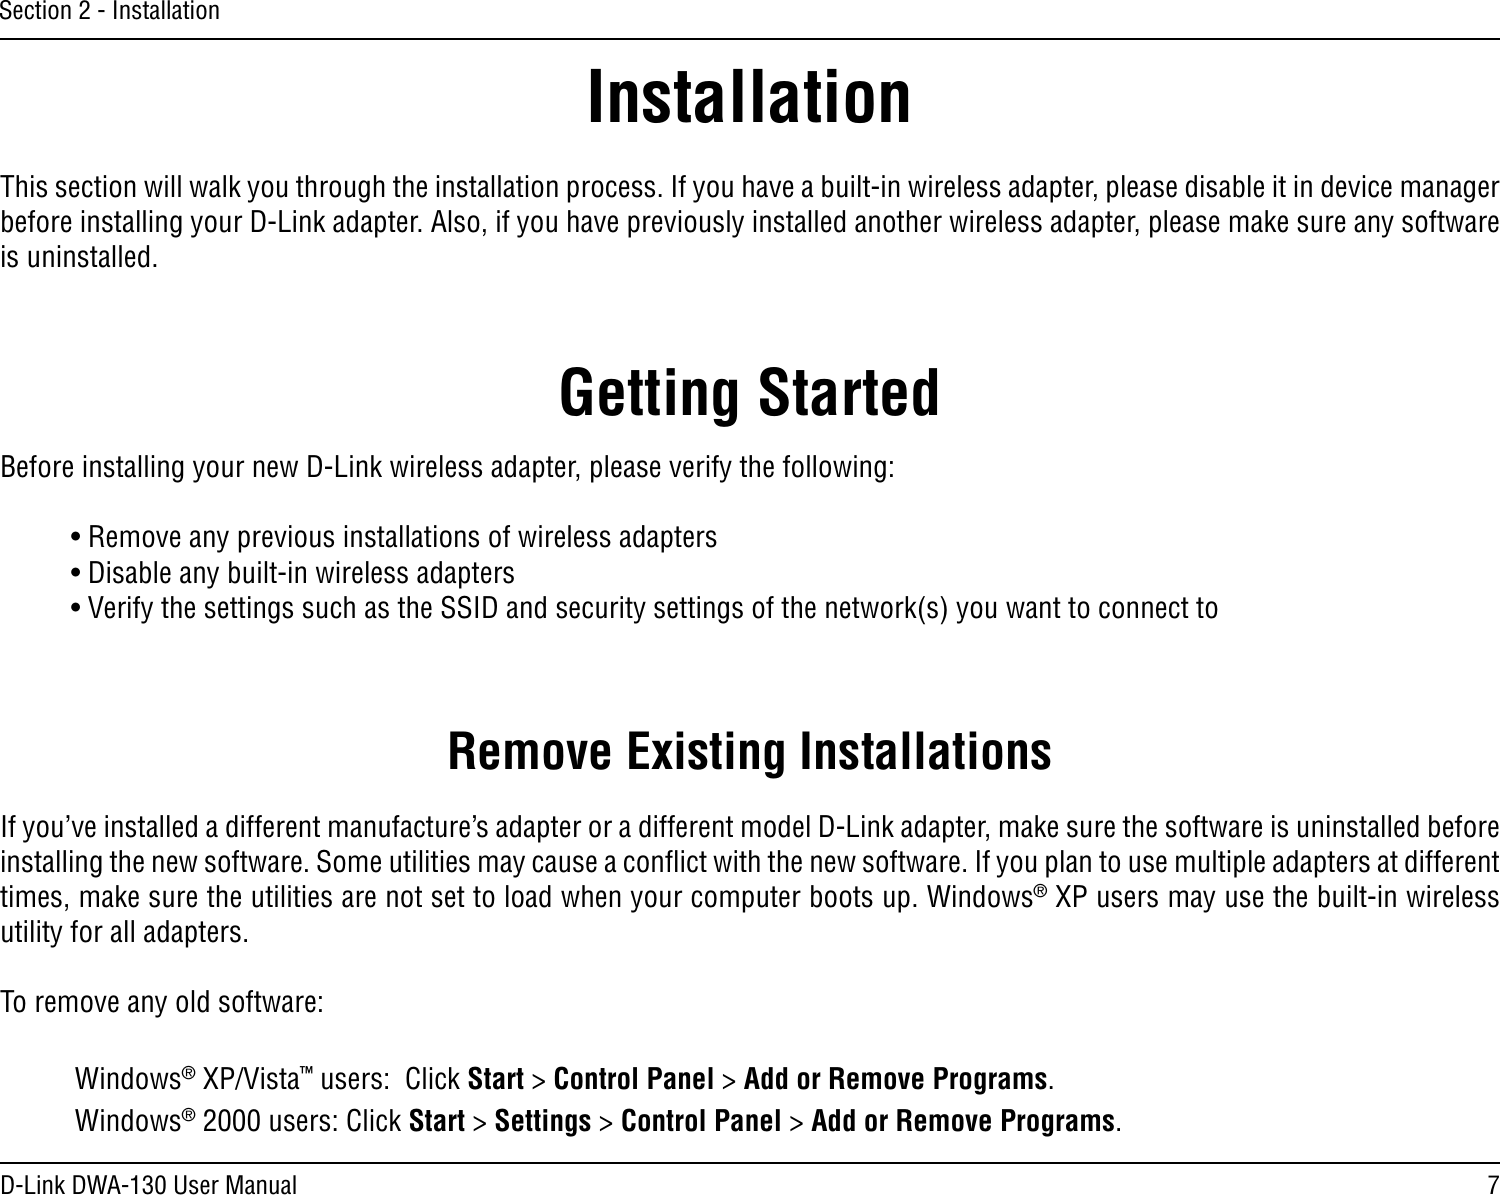 7D-Link DWA-130 User ManualSection 2 - InstallationGetting StartedInstallationThis section will walk you through the installation process. If you have a built-in wireless adapter, please disable it in device manager before installing your D-Link adapter. Also, if you have previously installed another wireless adapter, please make sure any software is uninstalled.Before installing your new D-Link wireless adapter, please verify the following:• Remove any previous installations of wireless adapters• Disable any built-in wireless adapters • Verify the settings such as the SSID and security settings of the network(s) you want to connect toRemove Existing InstallationsIf you’ve installed a different manufacture’s adapter or a different model D-Link adapter, make sure the software is uninstalled before installing the new software. Some utilities may cause a conﬂict with the new software. If you plan to use multiple adapters at different times, make sure the utilities are not set to load when your computer boots up. Windows® XP users may use the built-in wireless utility for all adapters.To remove any old software:  Windows® XP/Vista™ users:  Click Start &gt; Control Panel &gt; Add or Remove Programs.   Windows® 2000 users: Click Start &gt; Settings &gt; Control Panel &gt; Add or Remove Programs.